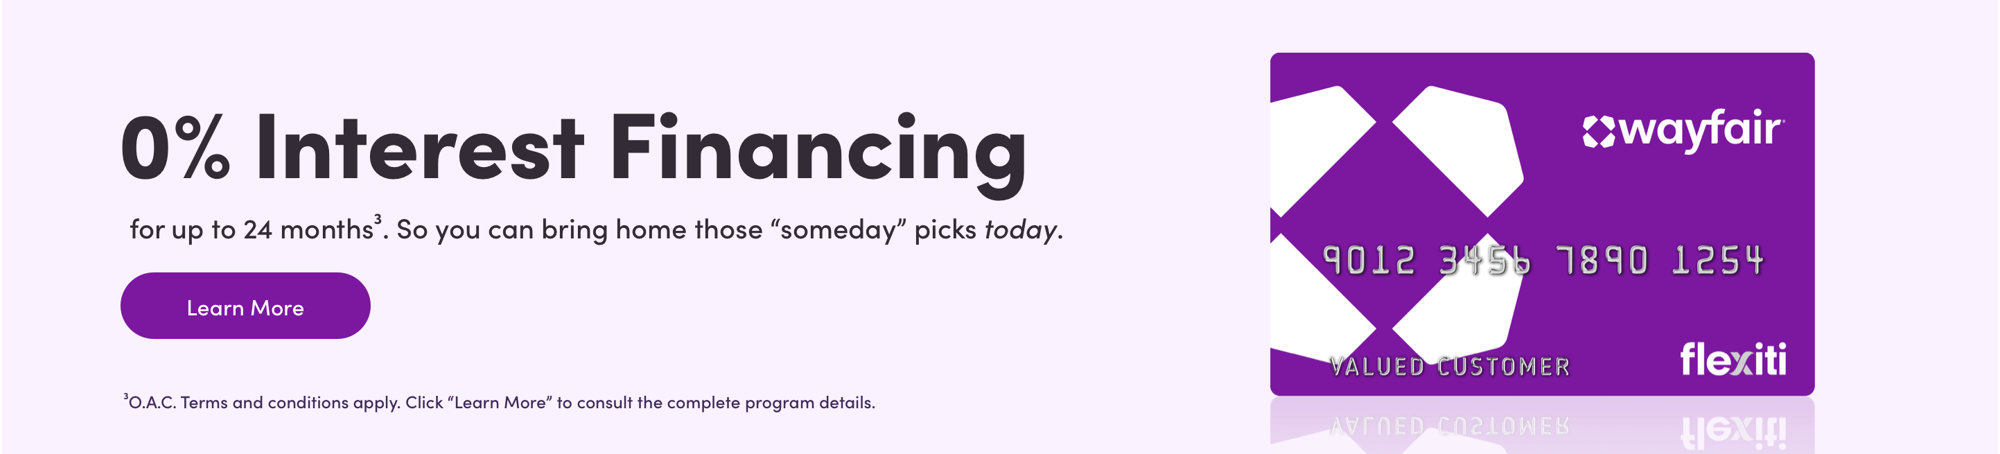 0% Interest Financing for up to 24 months. So you can bring home those "someday" picks today. Learn More.